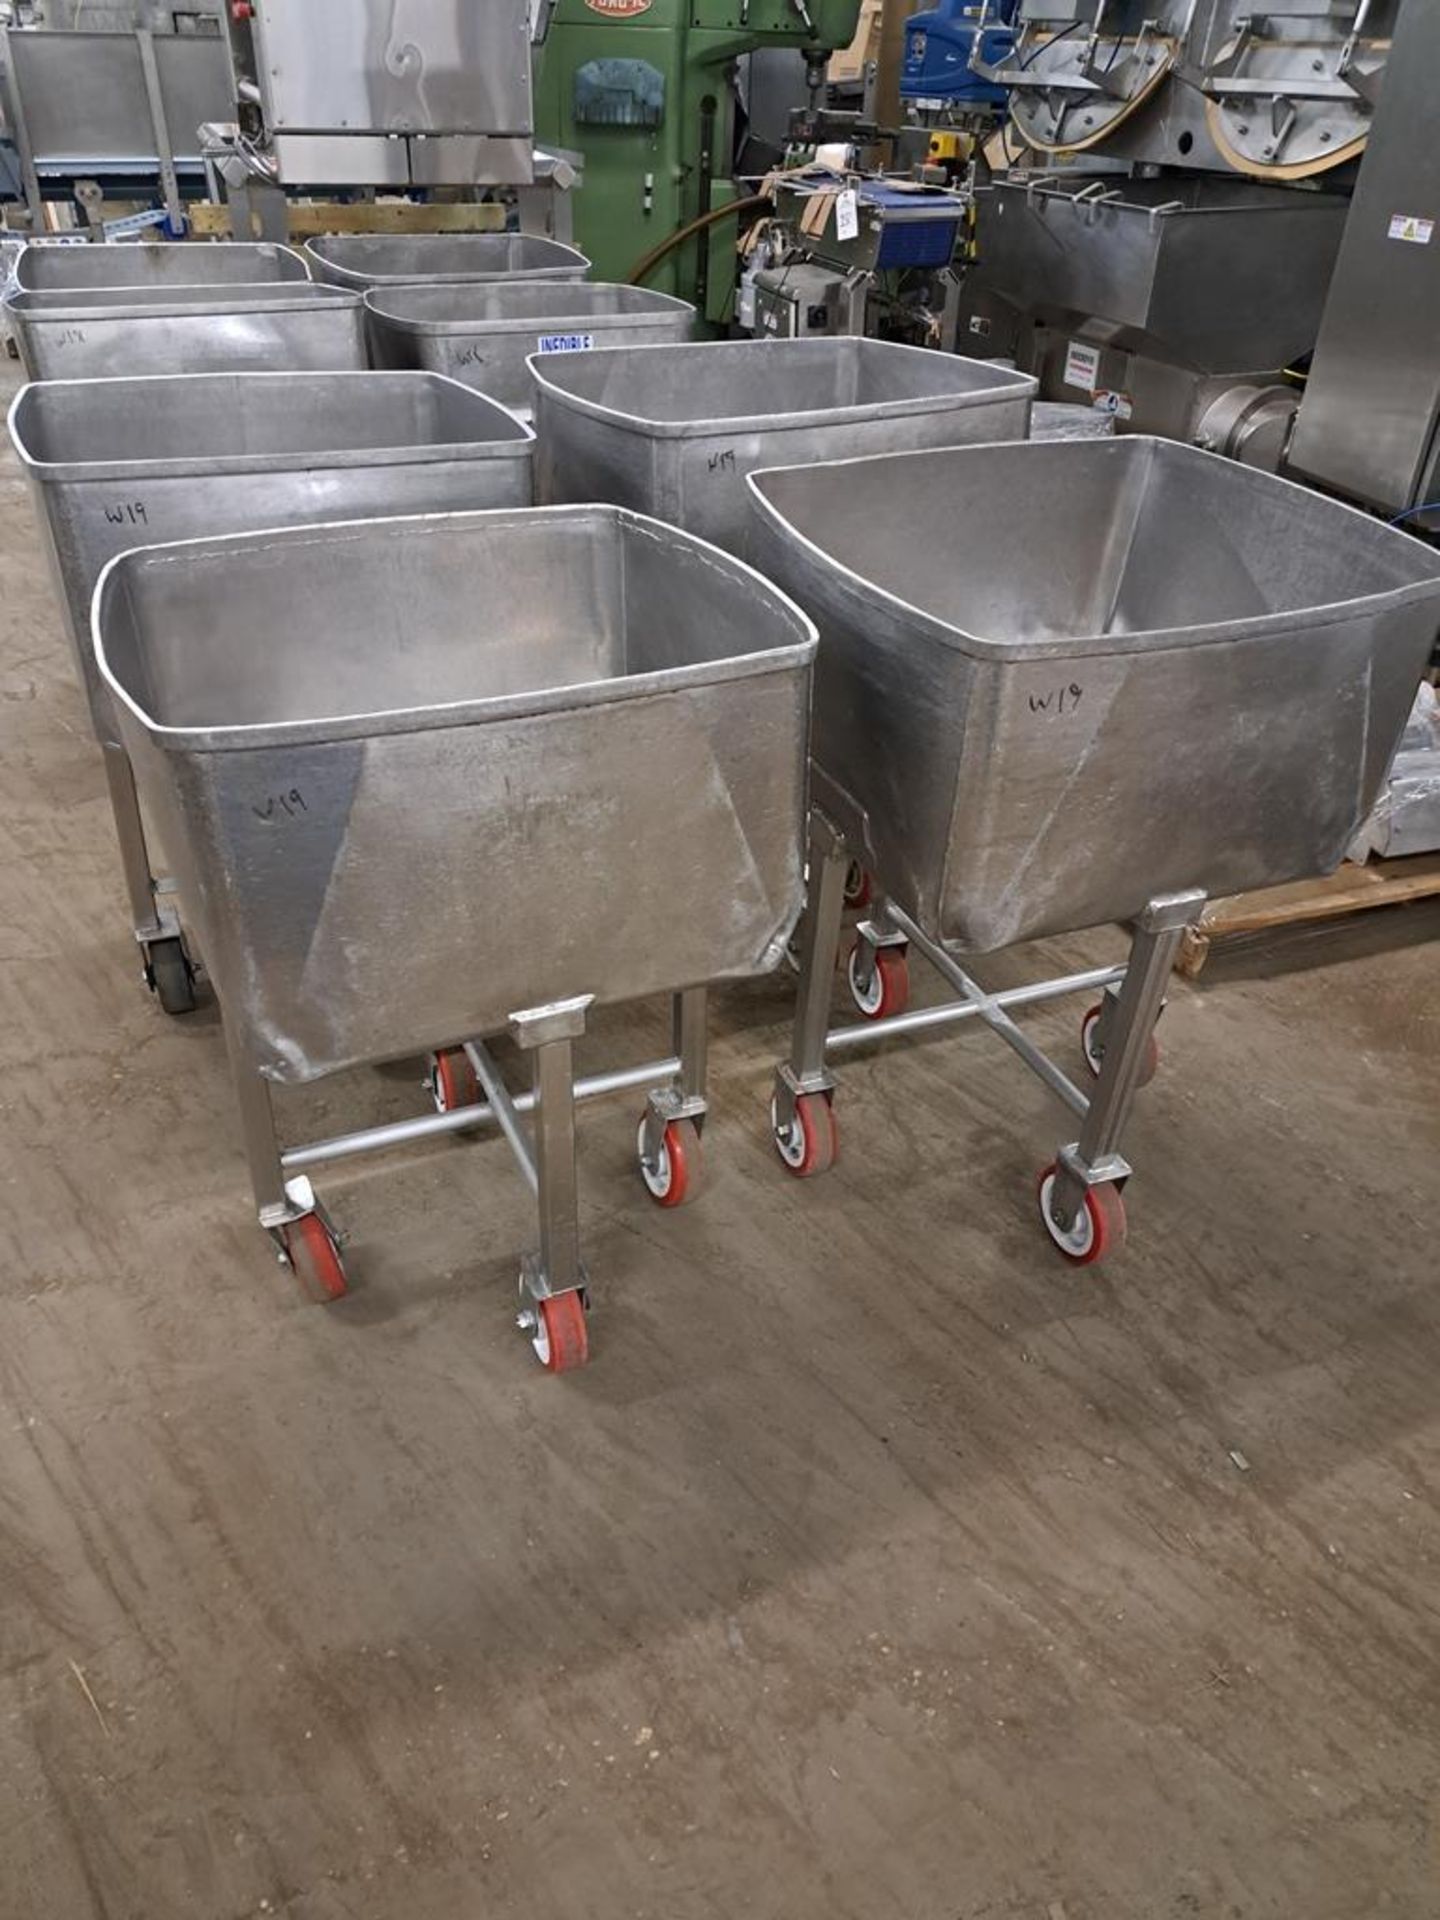 Stainless Steel Dump Buggies, 400 Lb. capacity, modified height Located In Sandwich, IL (Required